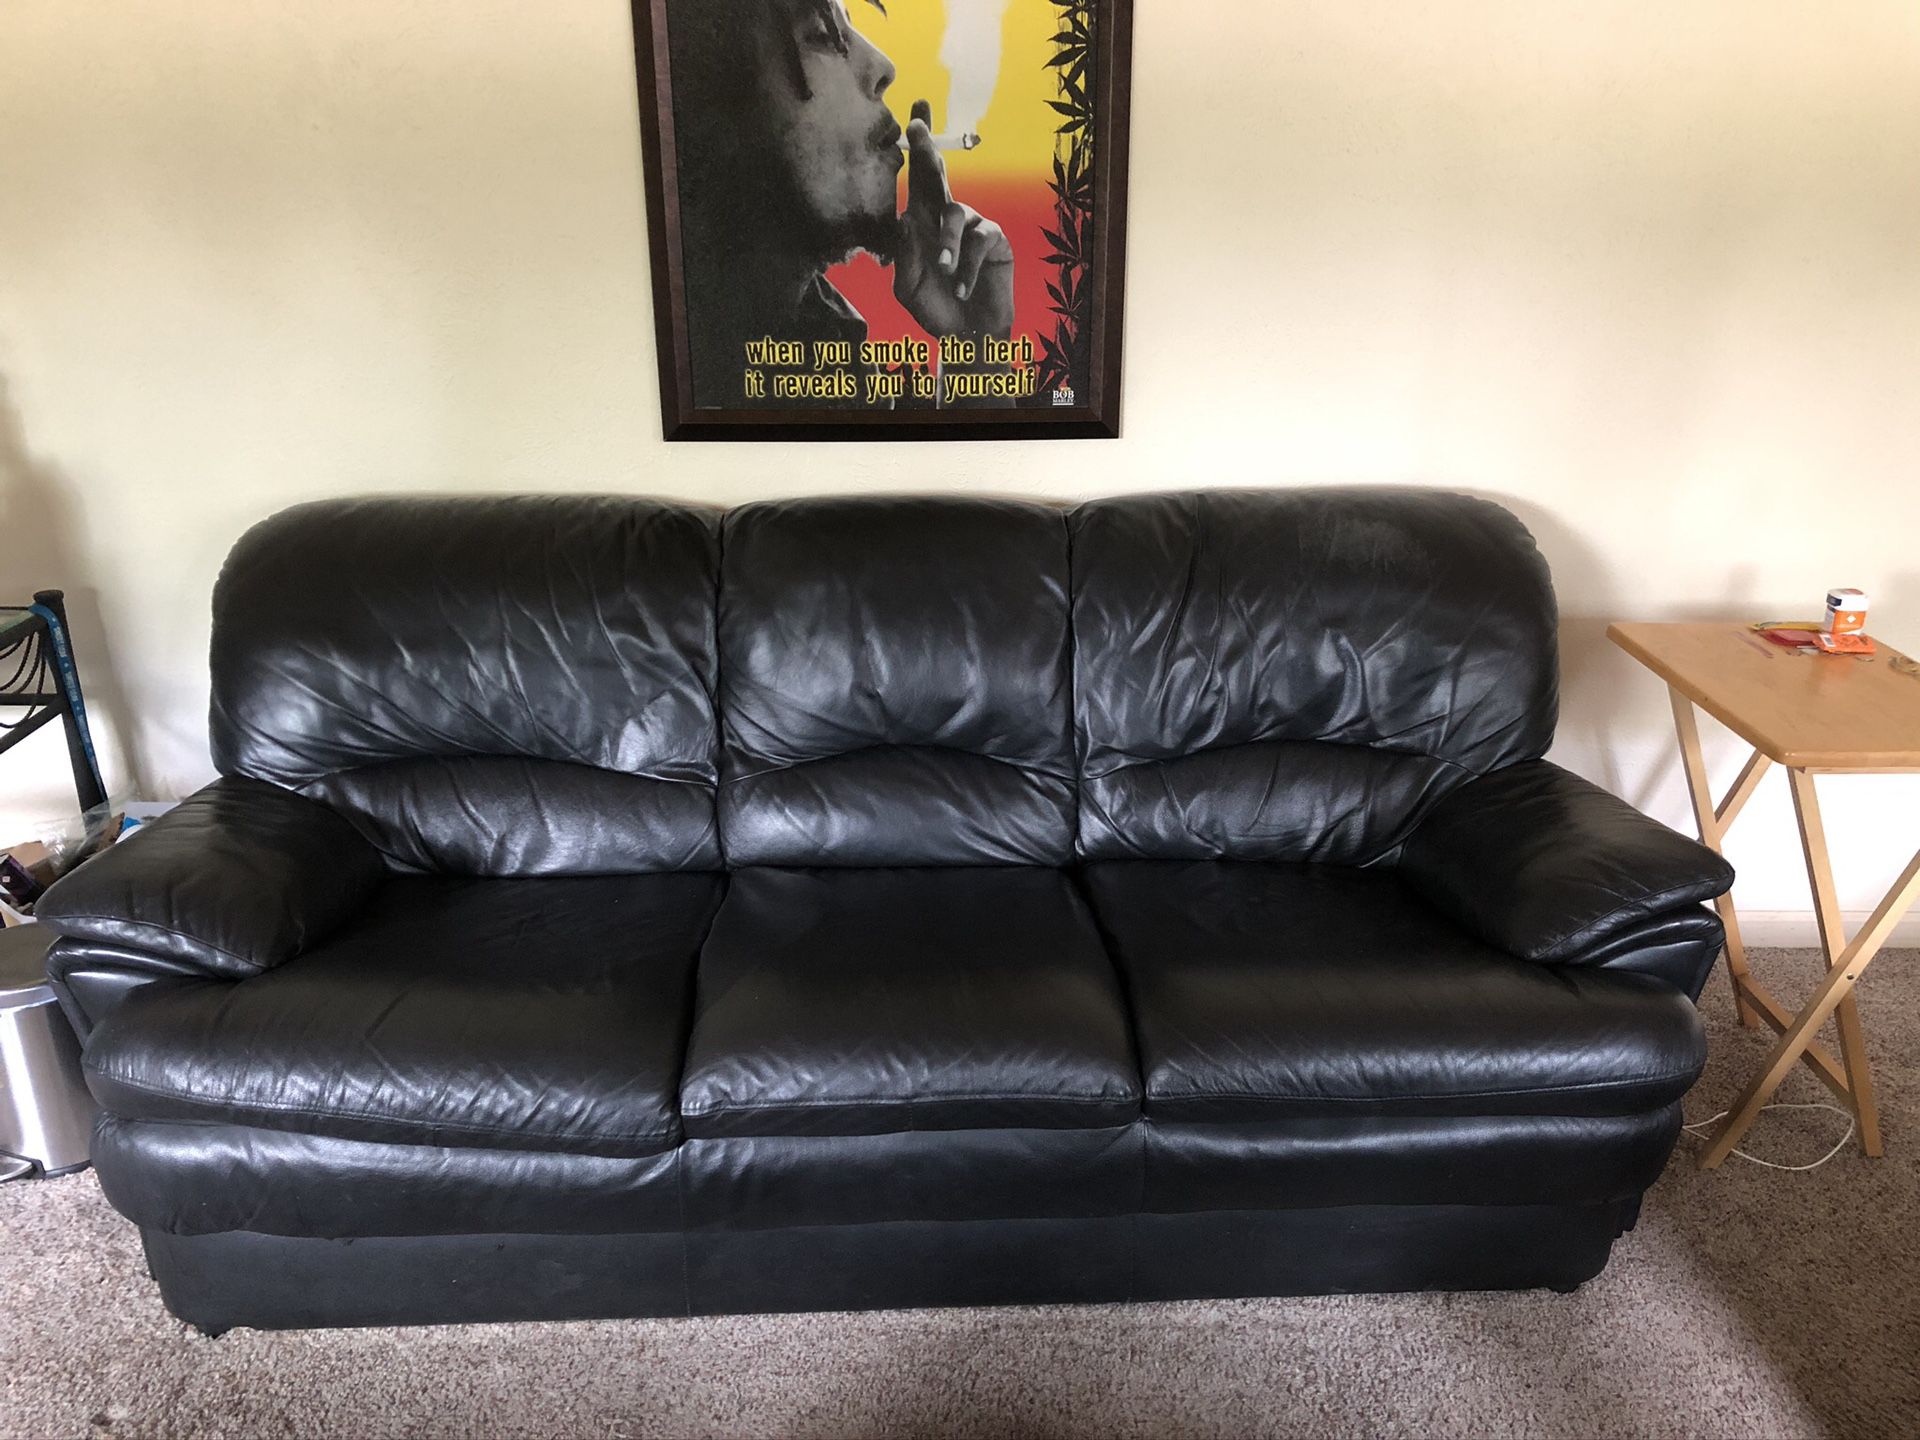 Black leather couch/sofa $90